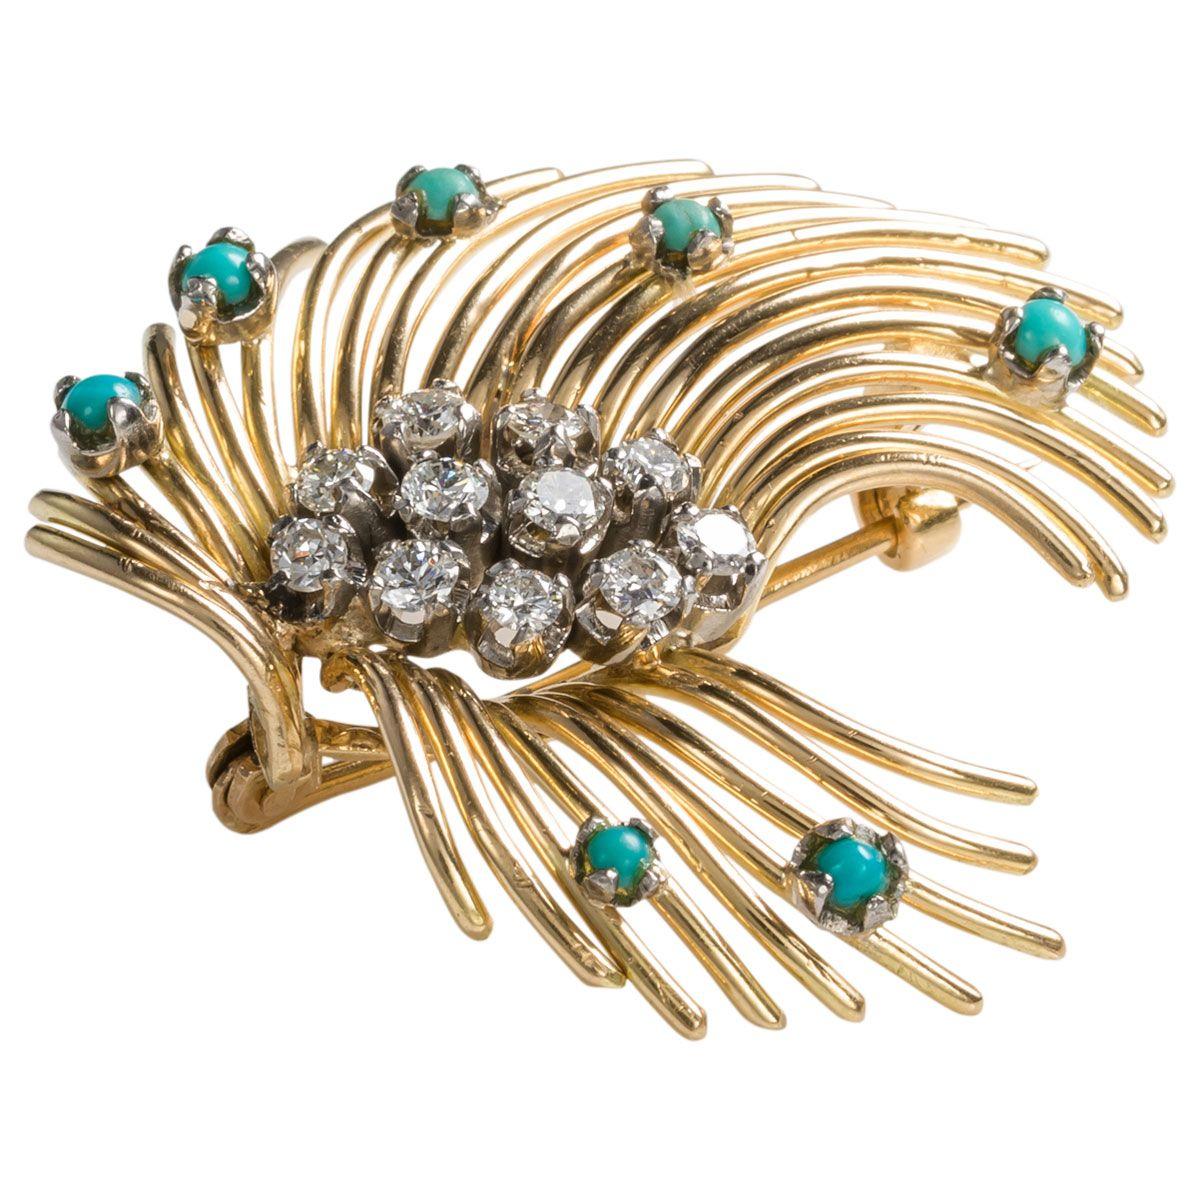 Elegant & stylish - a piece that can be worn on any outfit and it will add that finishing touch. A fabulous 1980's 18k yellow gold, turquoise and diamond spray brooch. Finely crafted with lovely detail it features 7 cabochon turquoise beads each